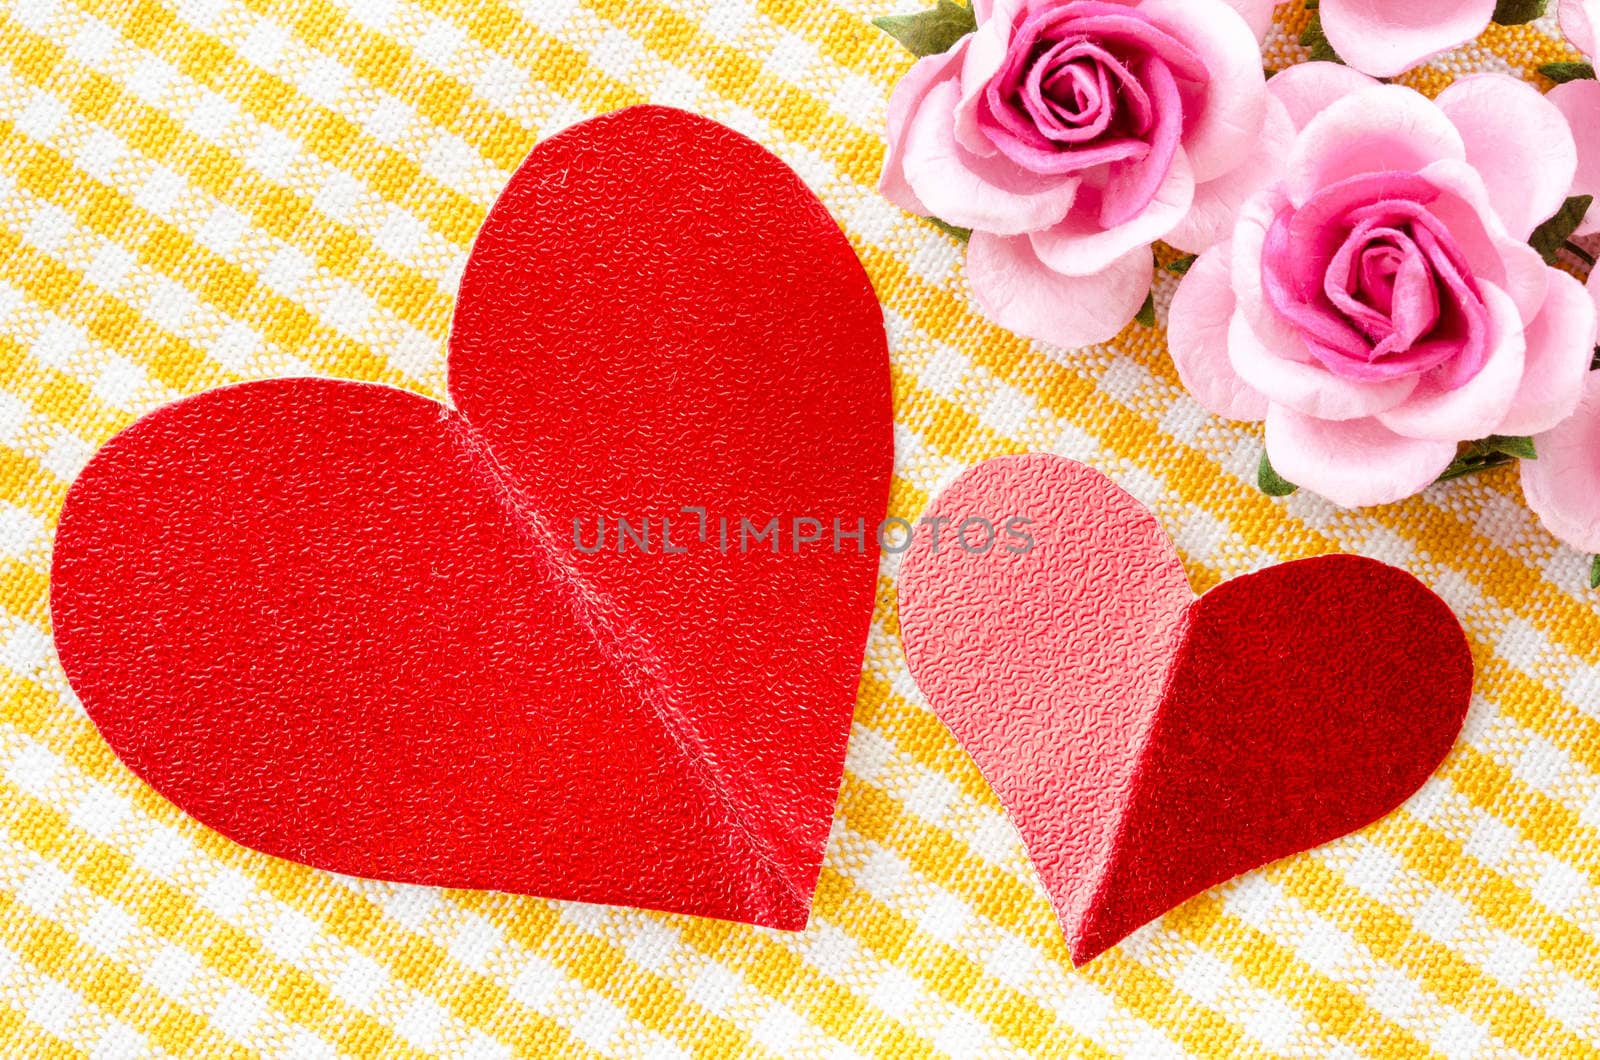 Red heart tag paper and pink rose flower on beautiful fabric background.